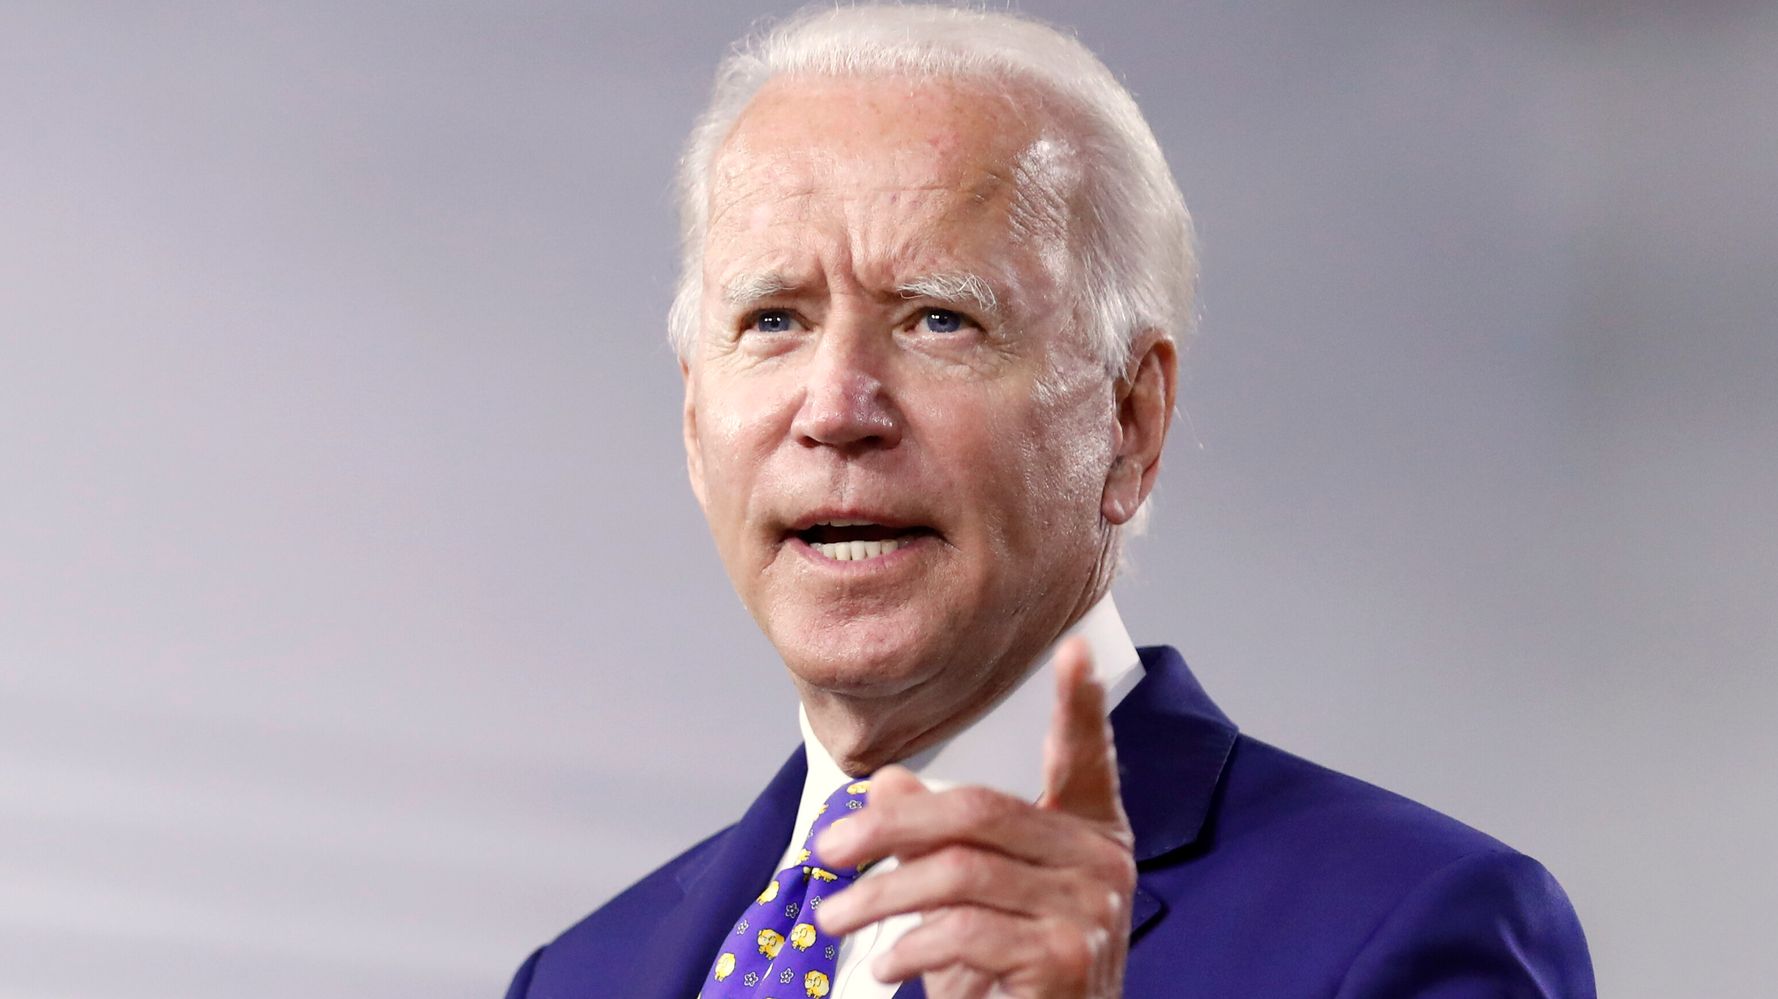 Biden Shows A Simple Way To Silence Trump’s Conspiracy Theories Once And For All